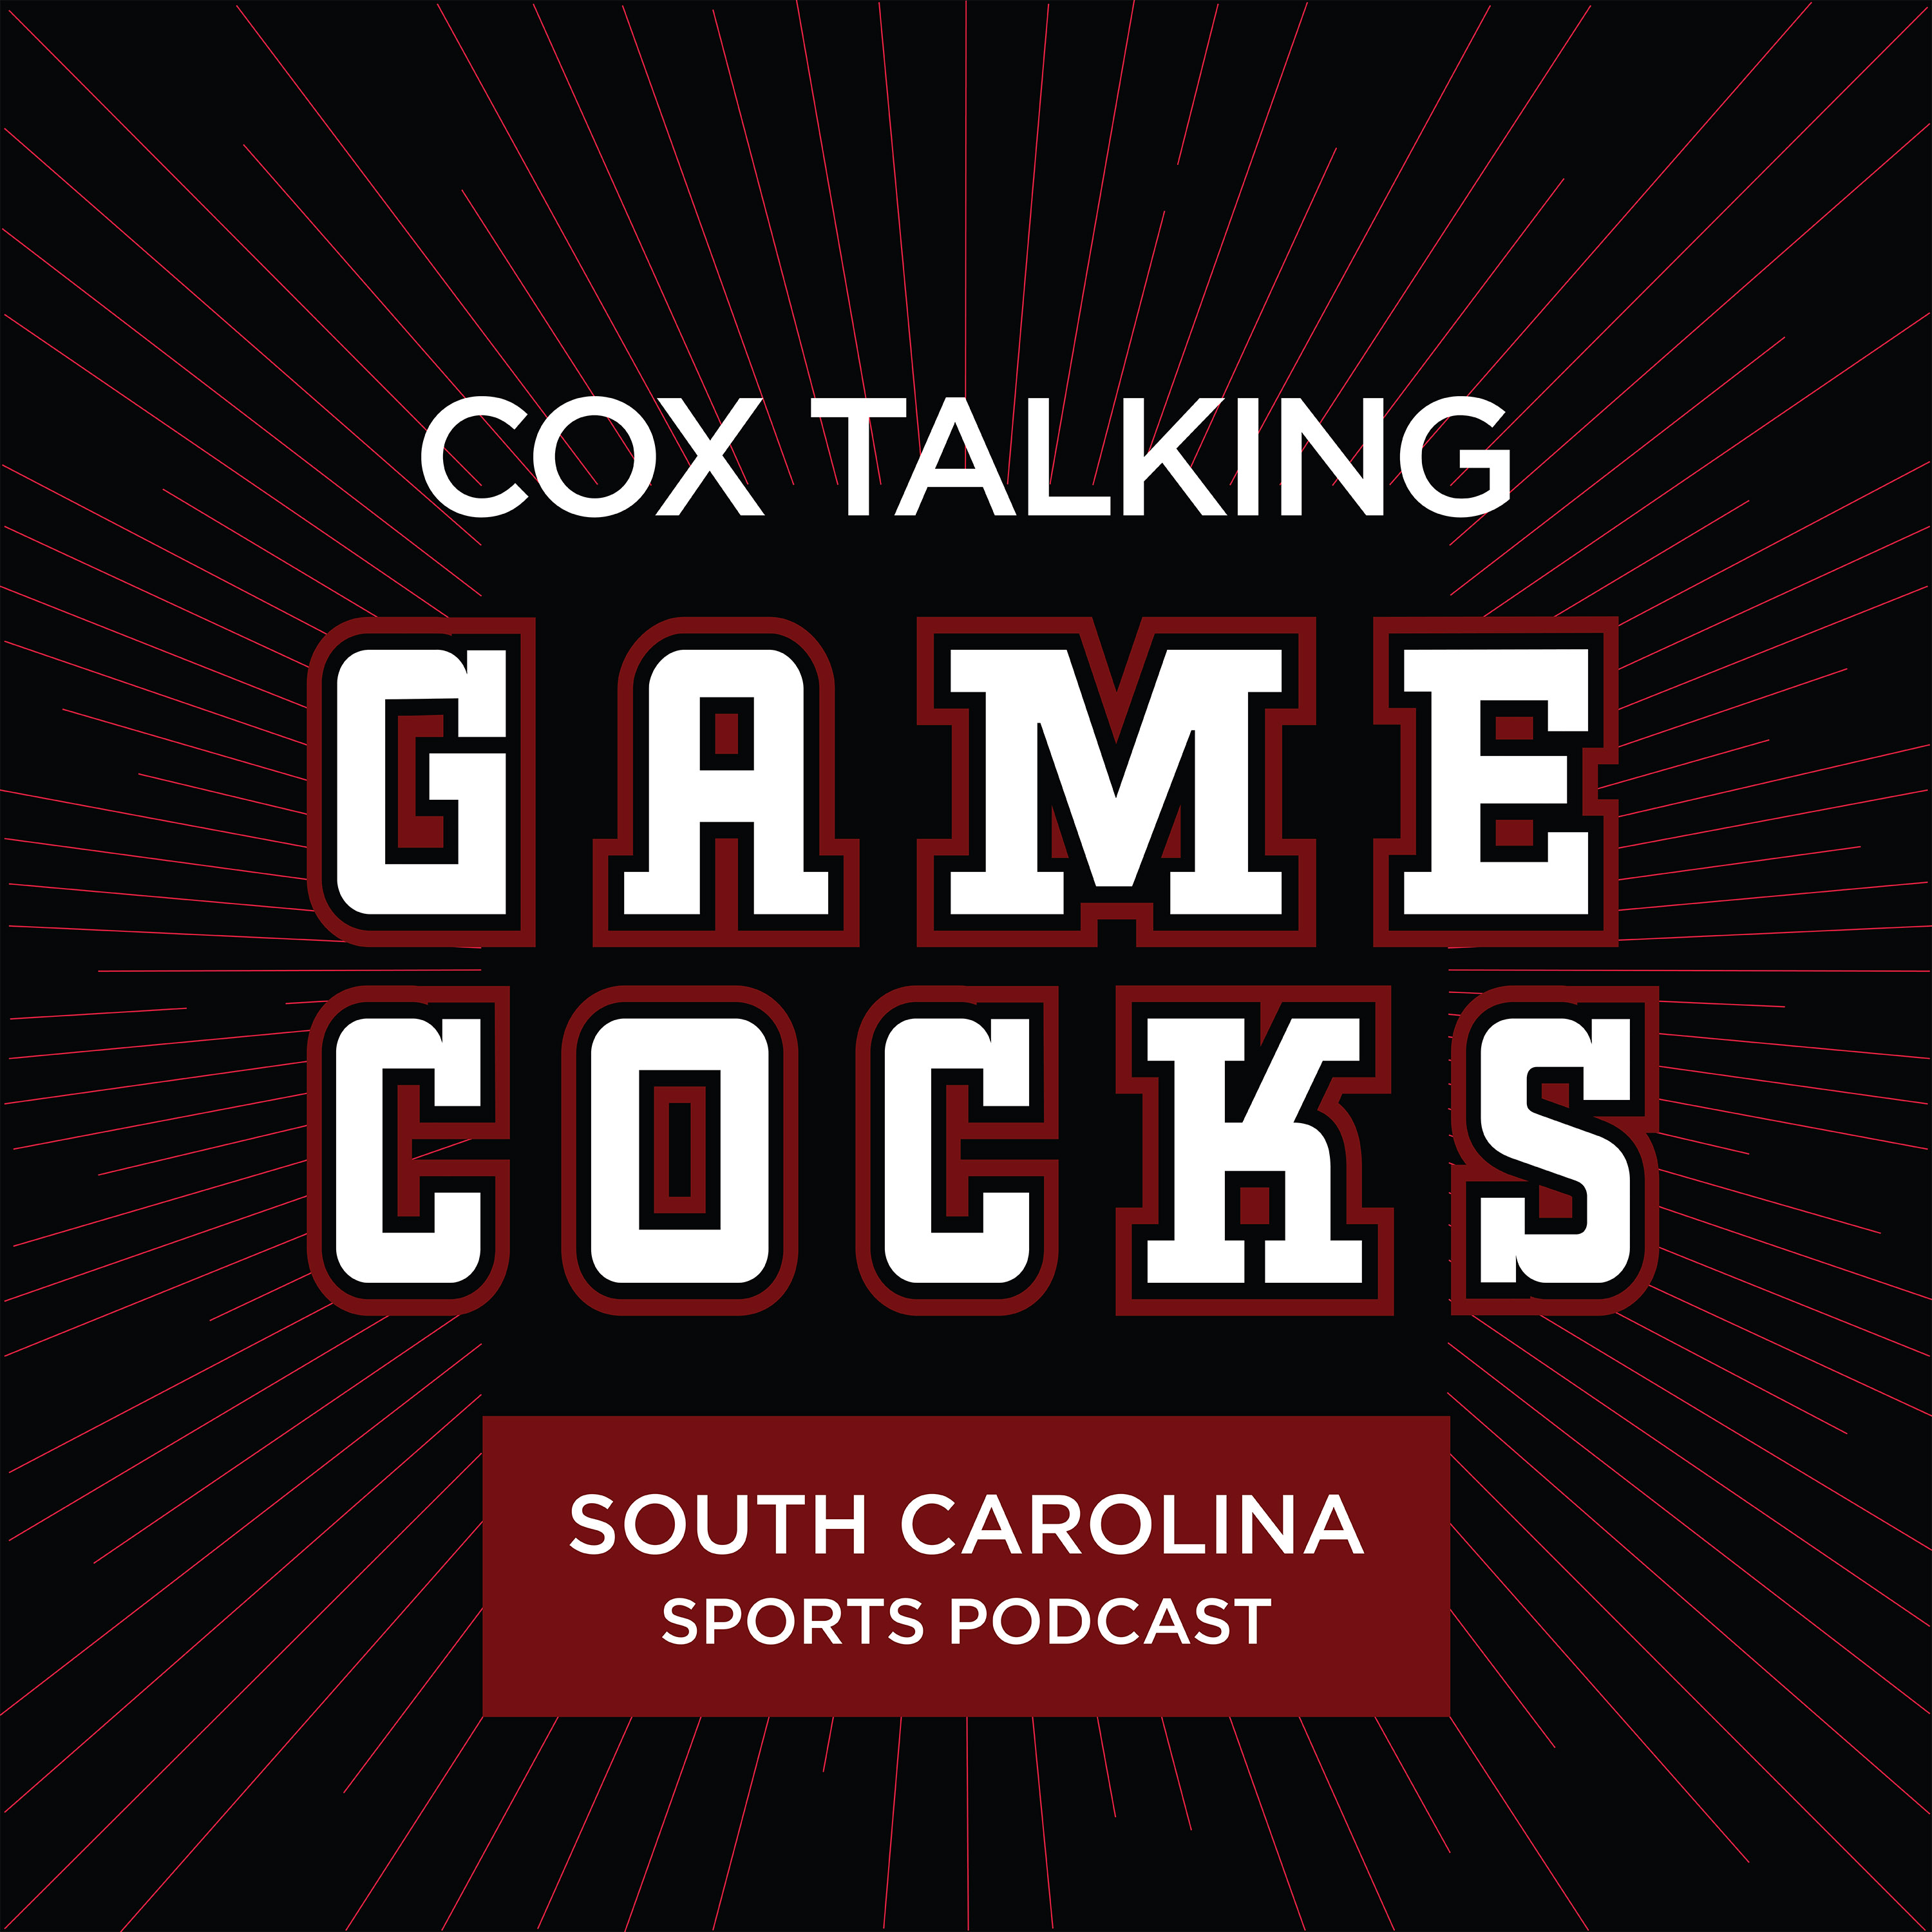 Gamecocks Fall To A&M, Postgame Reaction + Weekend Recap From USC Athletics